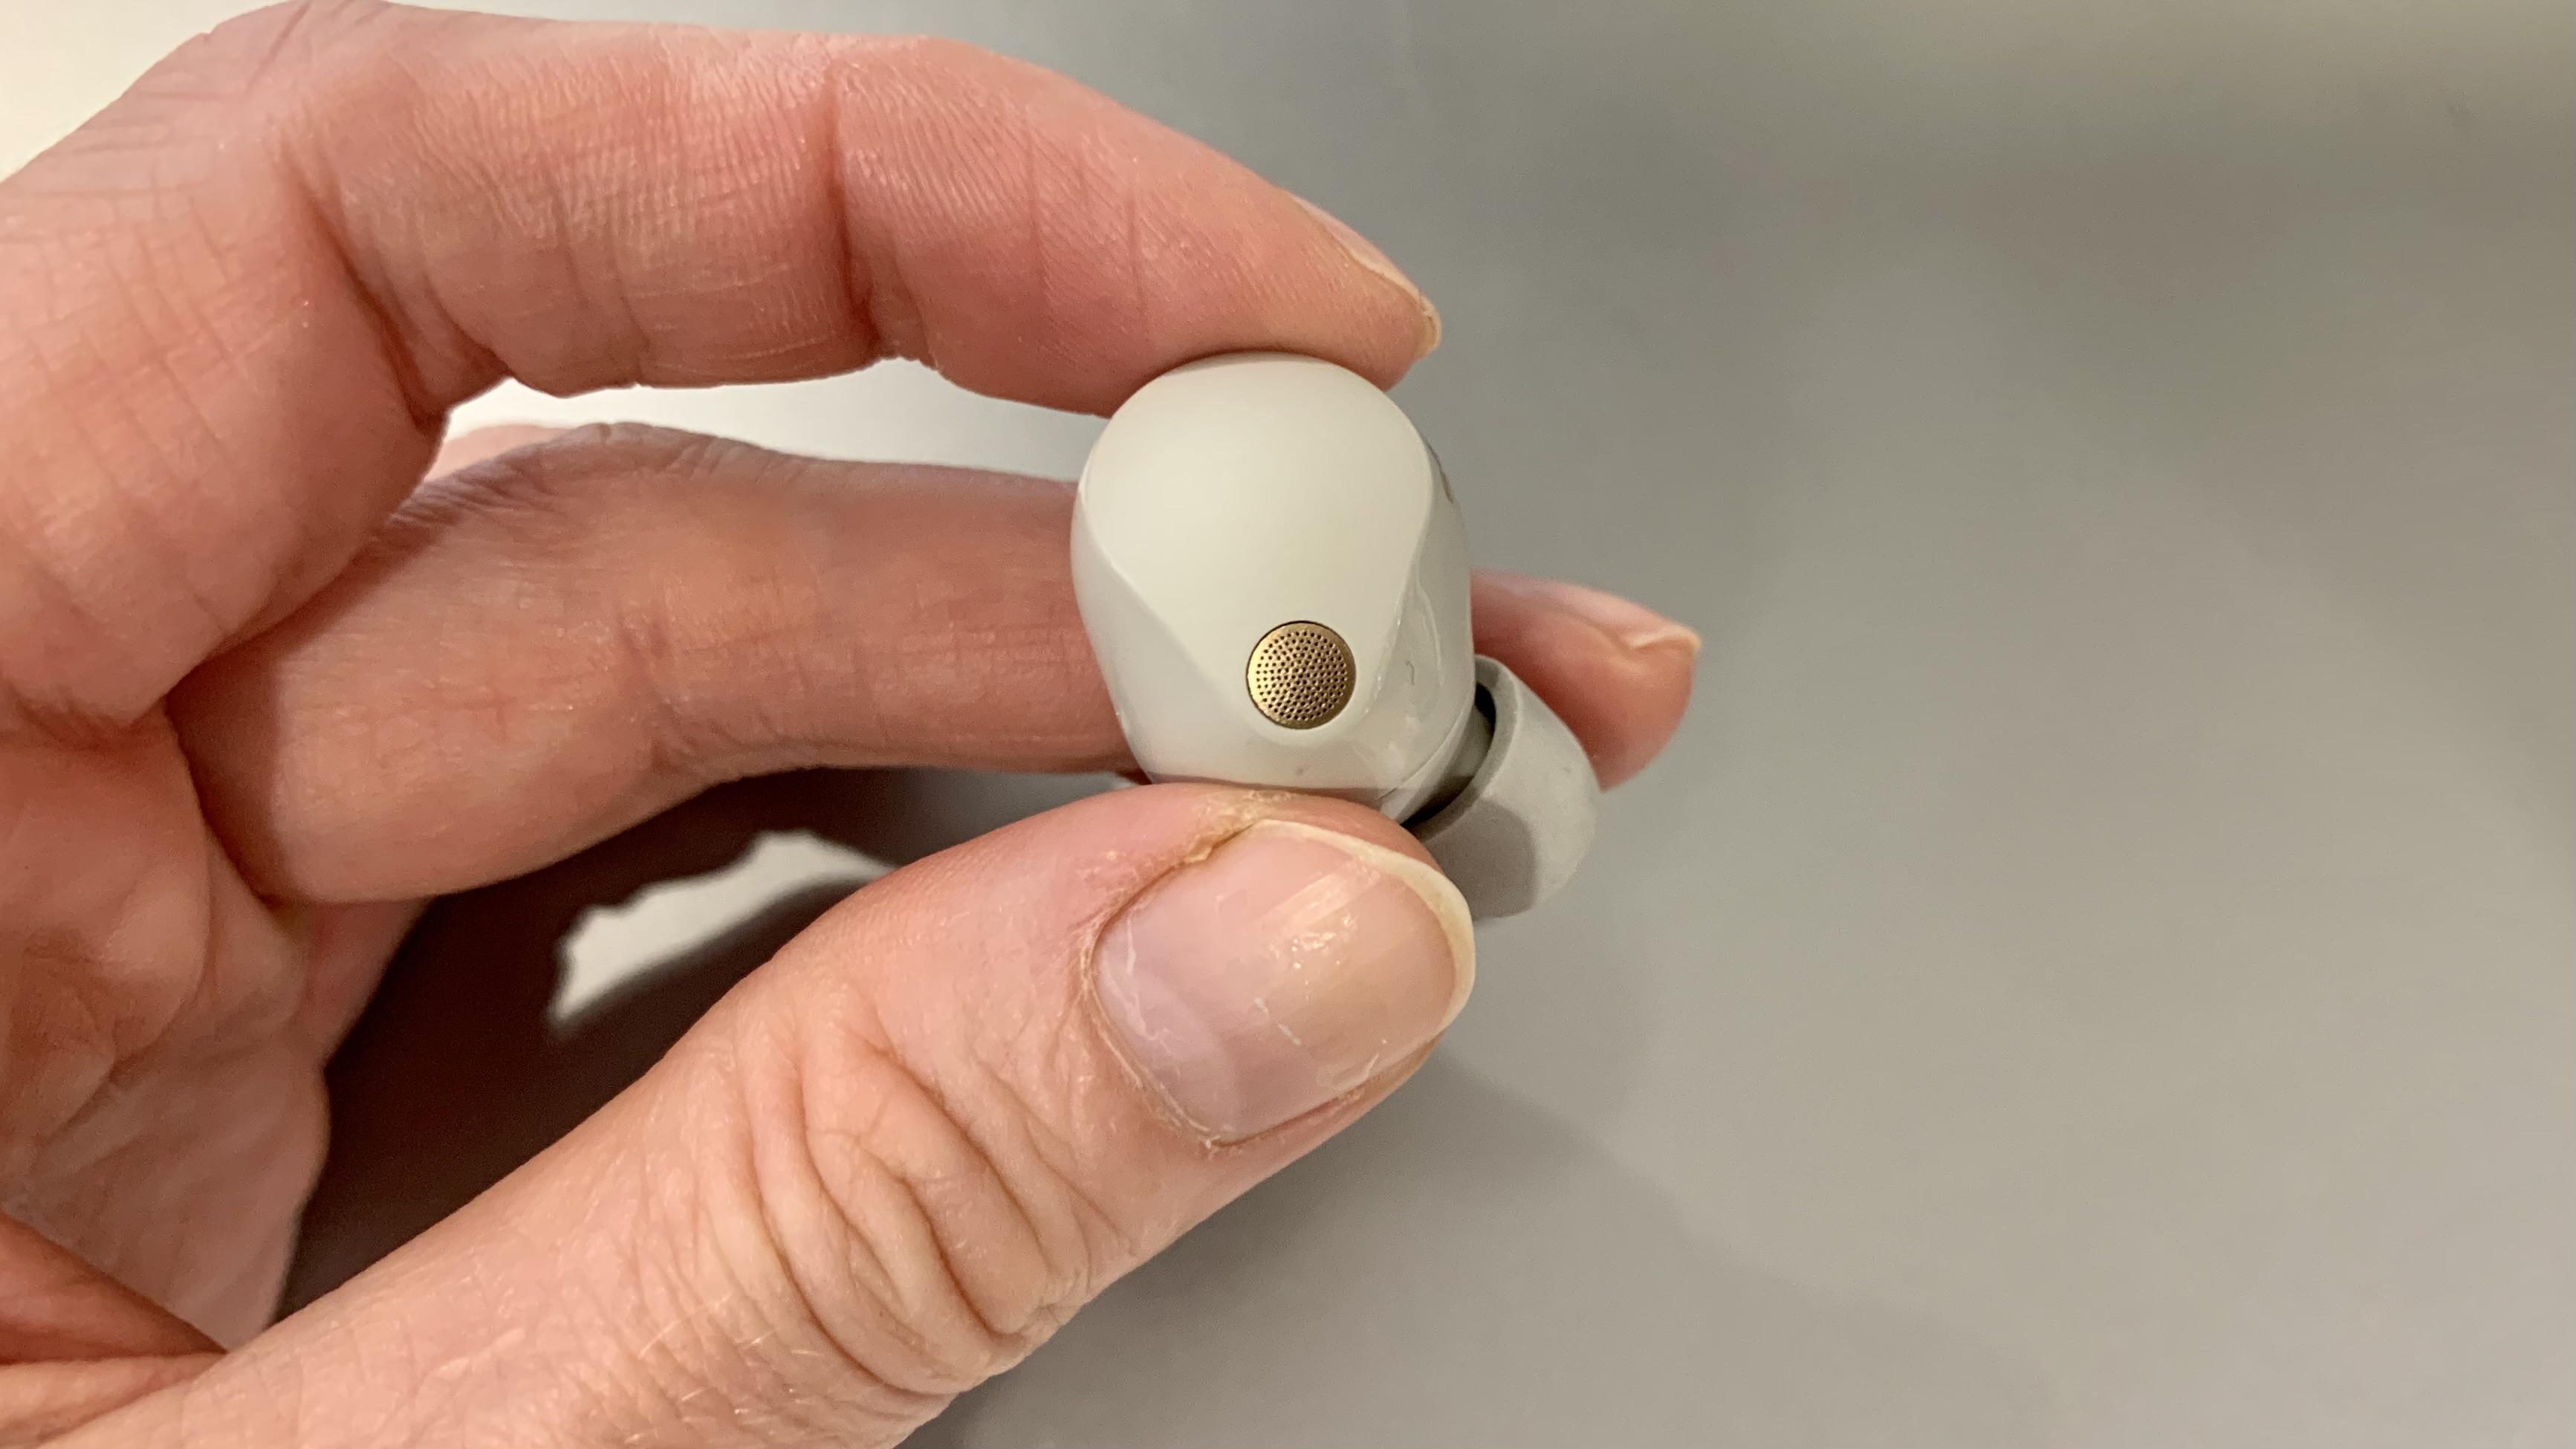 Sony WF-1000XM5 earbud held in a hand